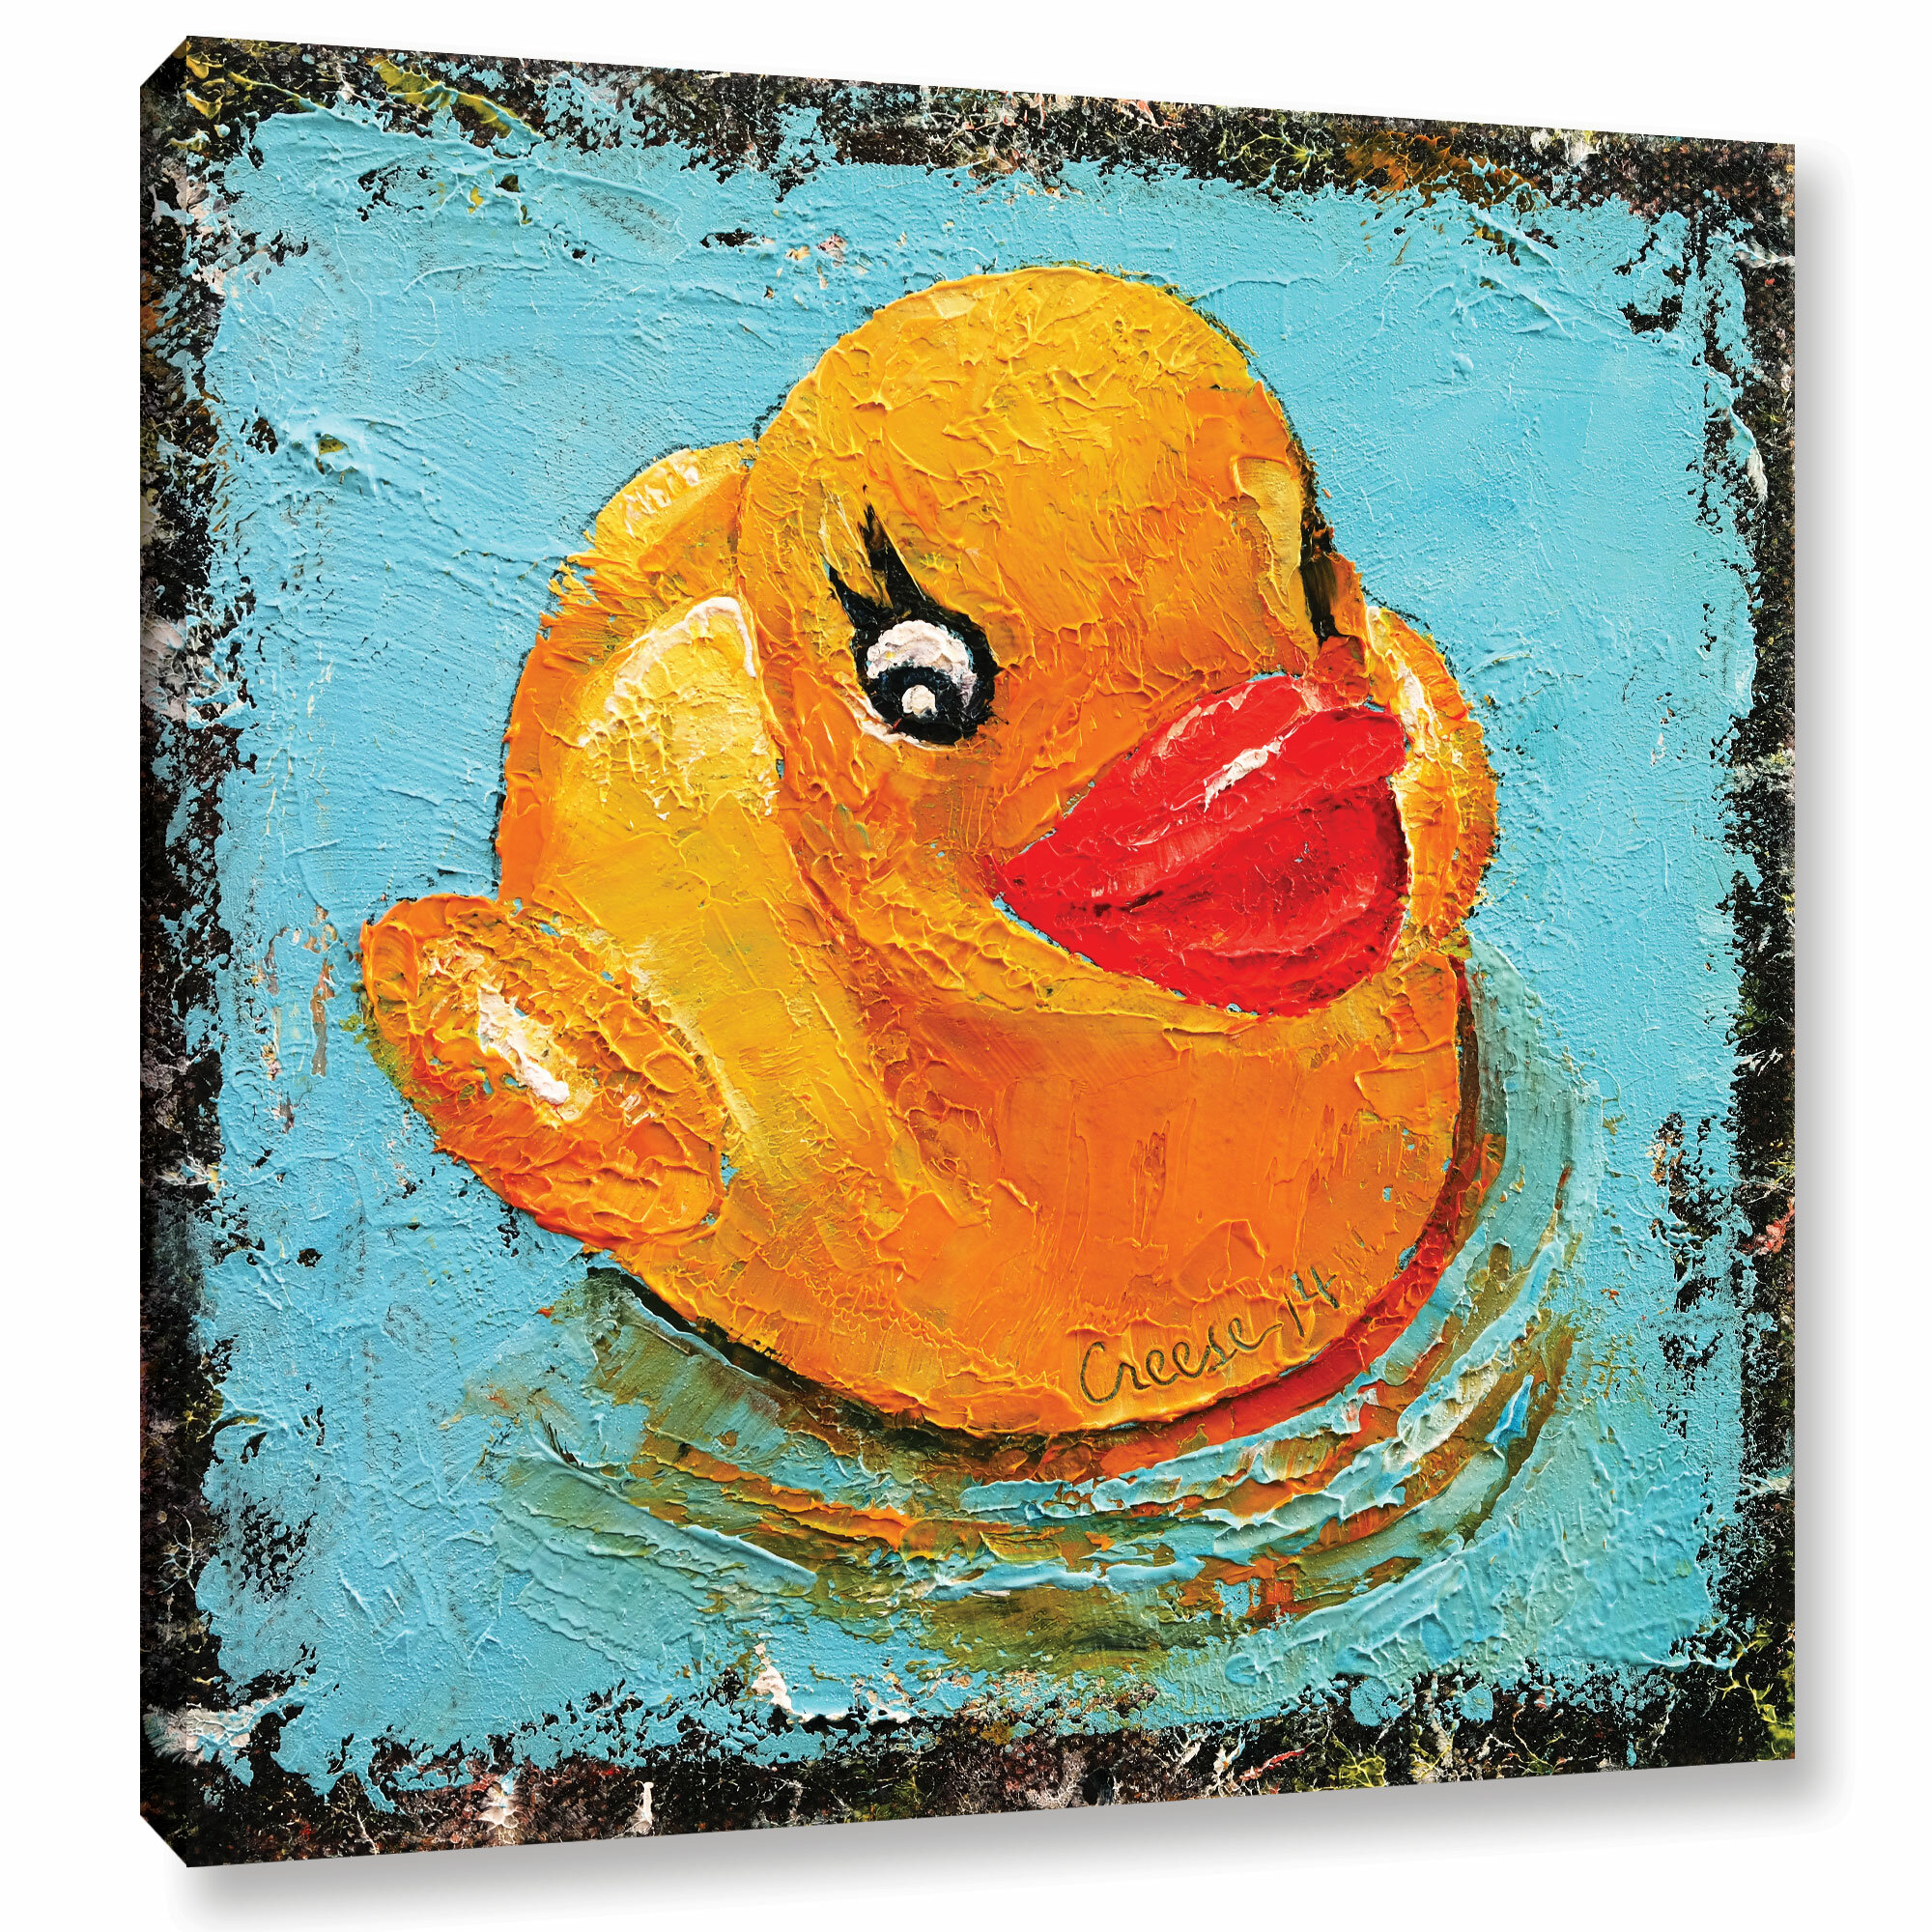 Rubber Duck Water Bathroom Print MULTI CANVAS WALL ART Picture 